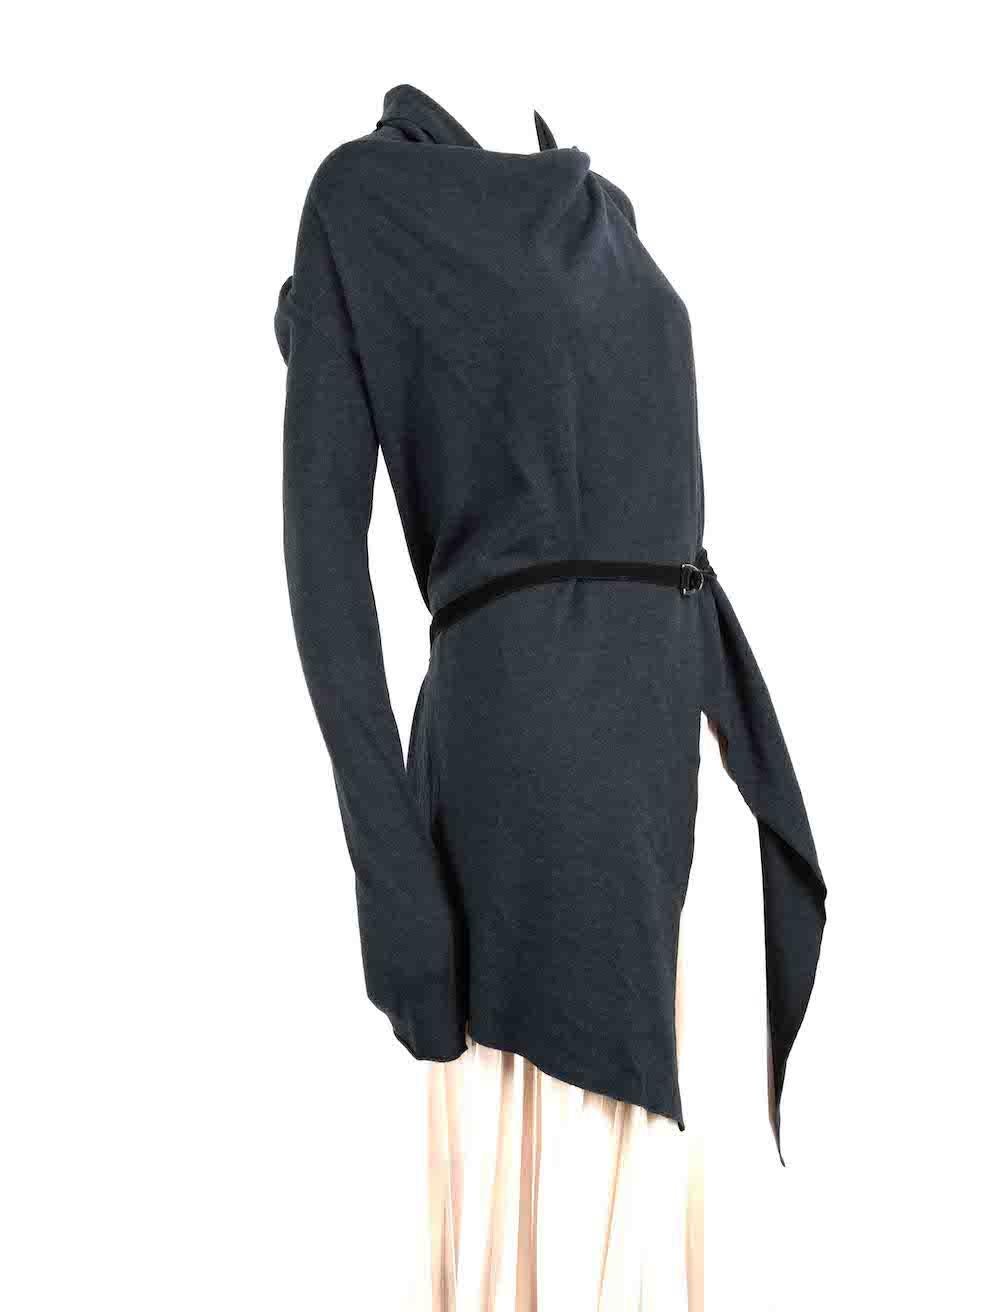 CONDITION is Very good. Hardly any visible wear to knit is evident on this used Helmut Lang designer resale item.
 
 Details
 Navy
 Wool
 Draped detail
 Leather trim with hook fastening
 Suede belt
 Long sleeves
 
 
 Made in USA
 
 Composition
 100%